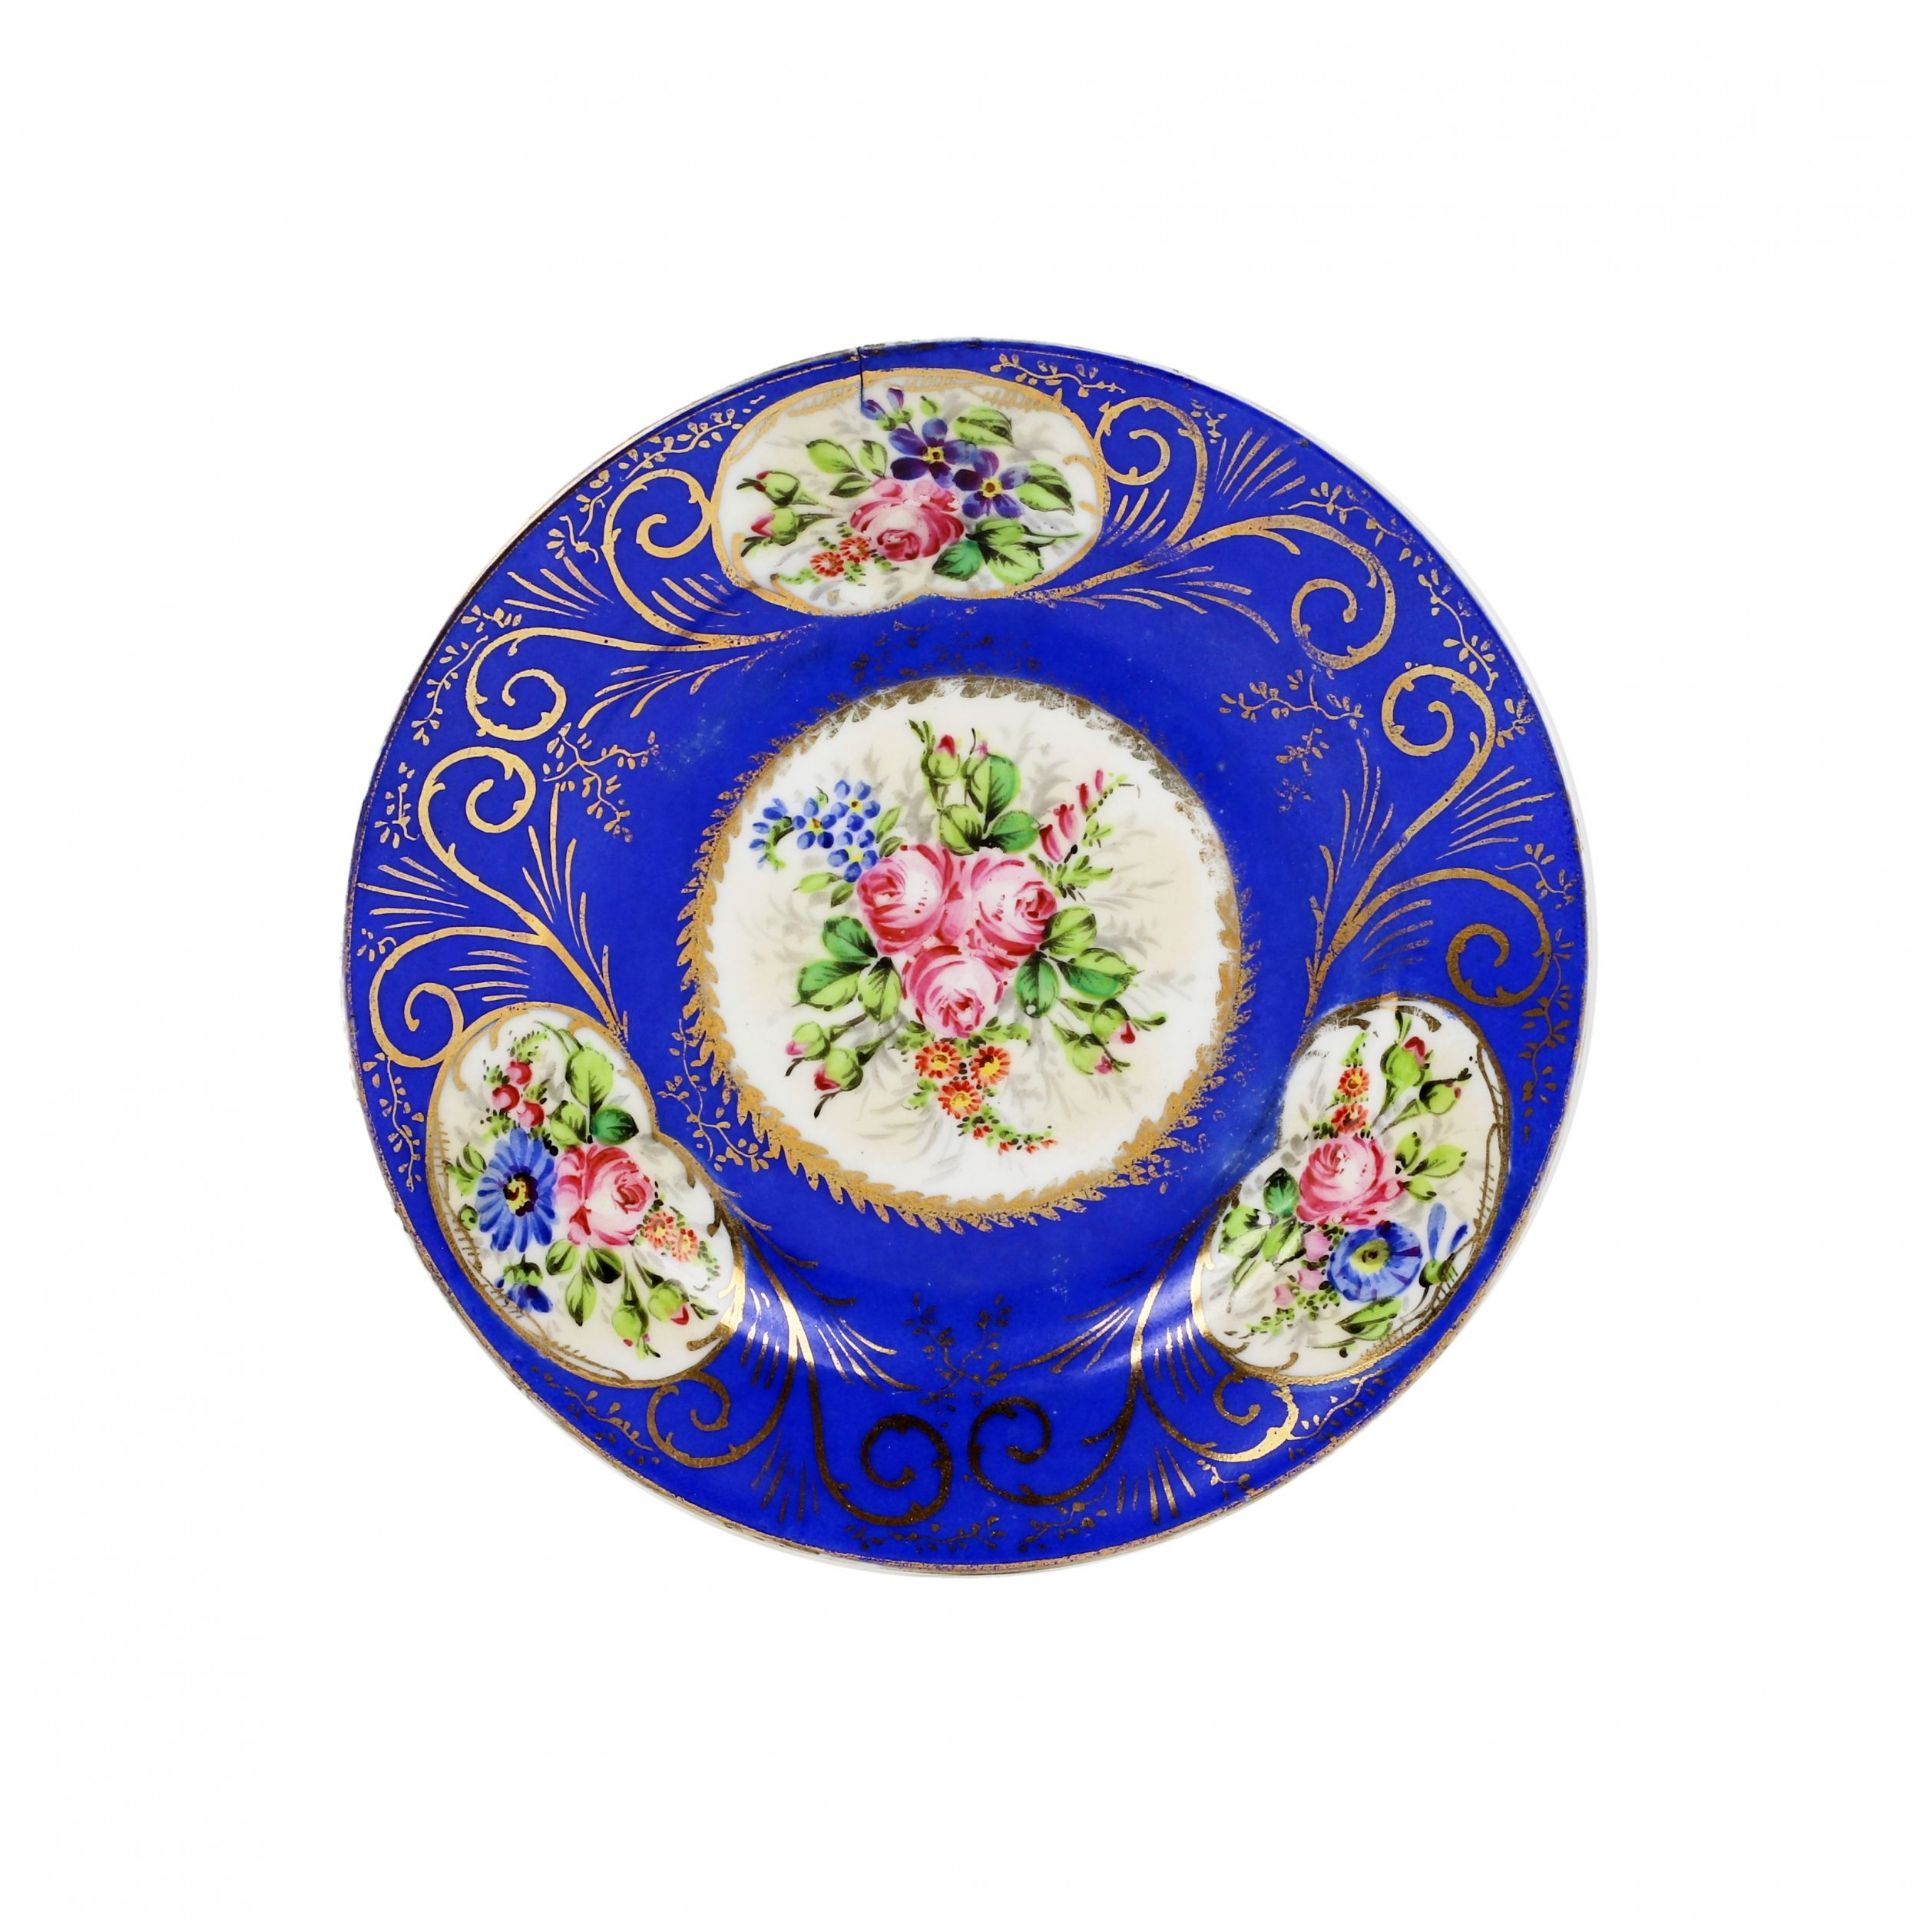 Five dishes and plates from Popov`s factory. 19th century. - Image 11 of 13